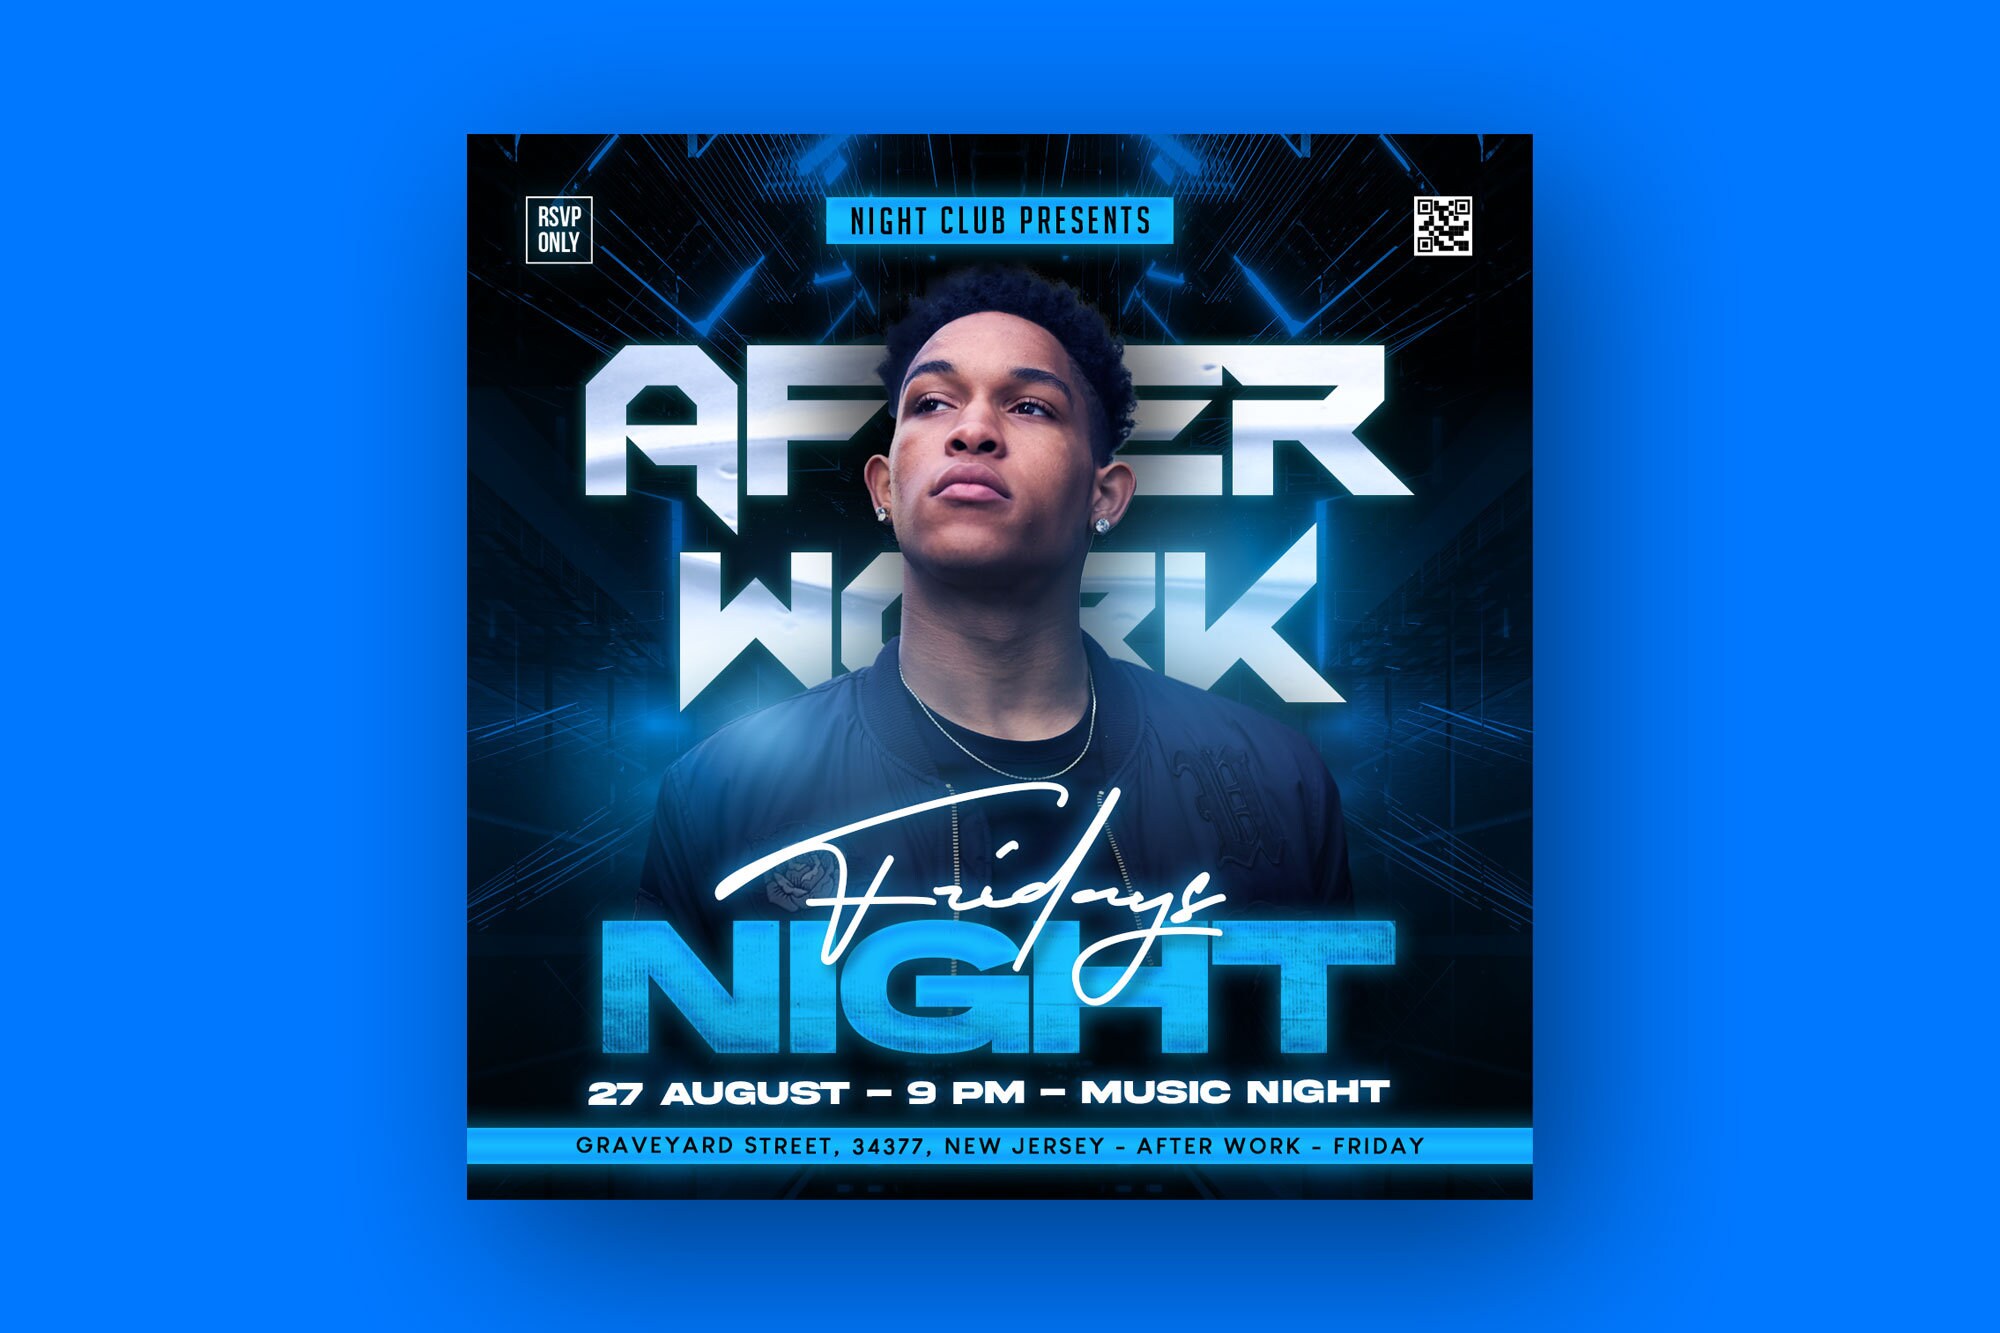 EDITABLE Party Flyer Night Party Party Flyer Template Night 